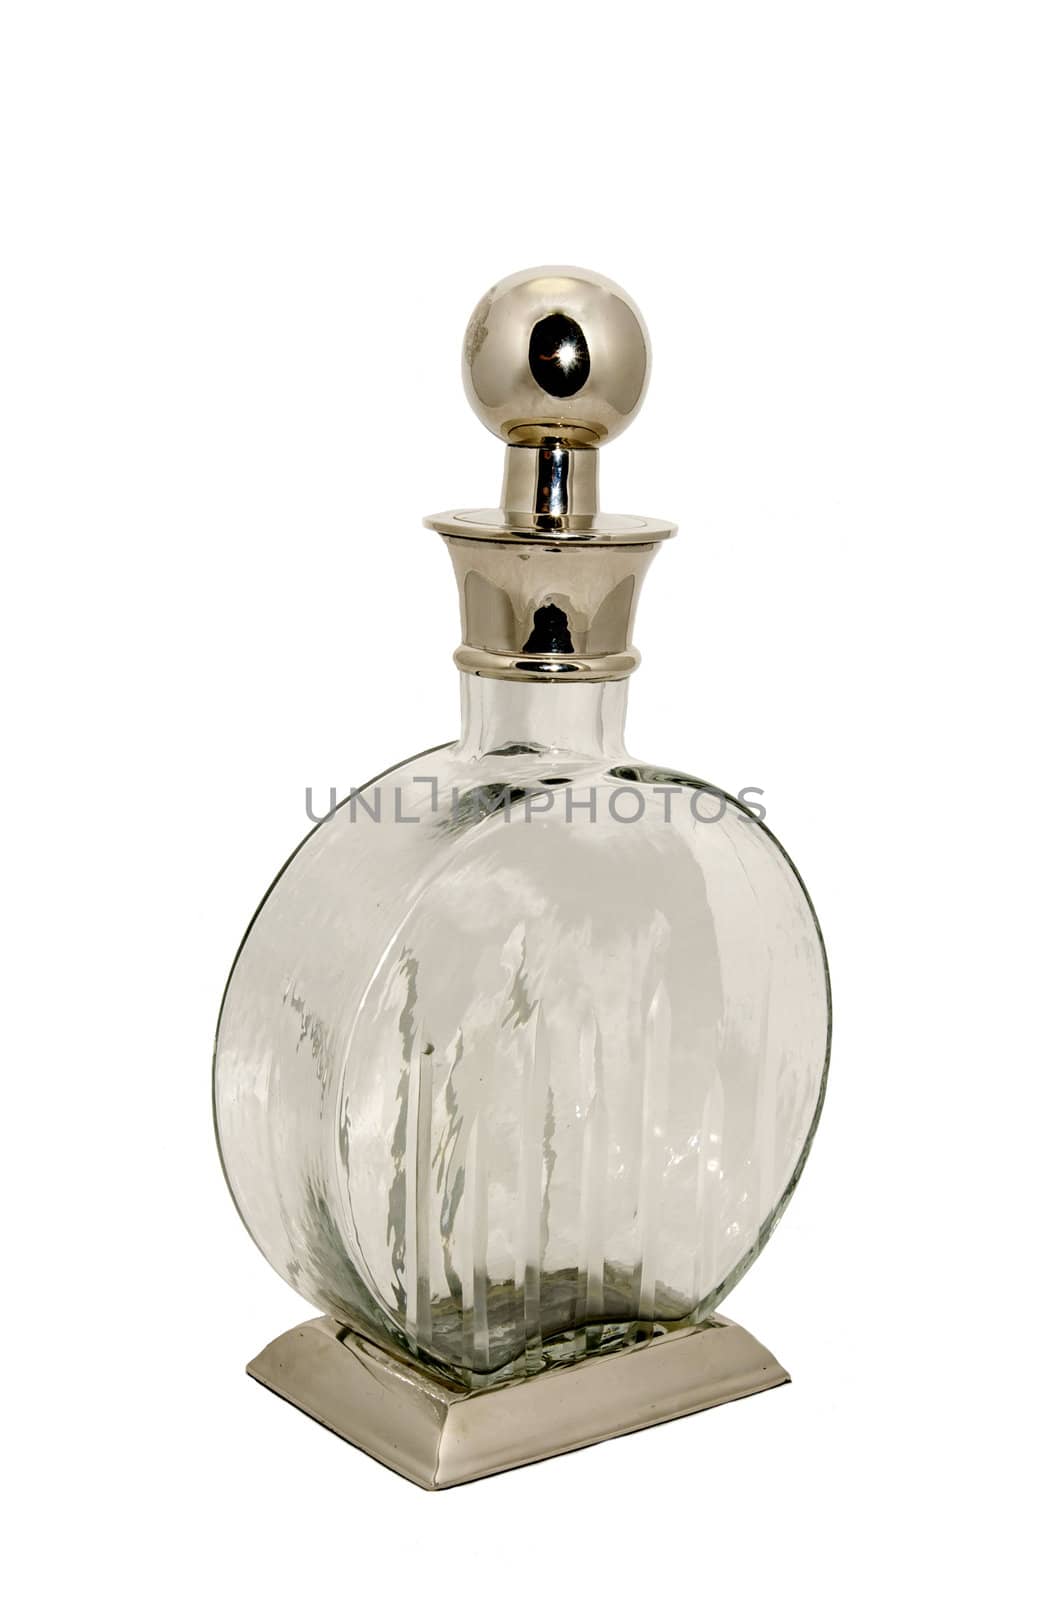 a beautiful old glass bottle on a white background